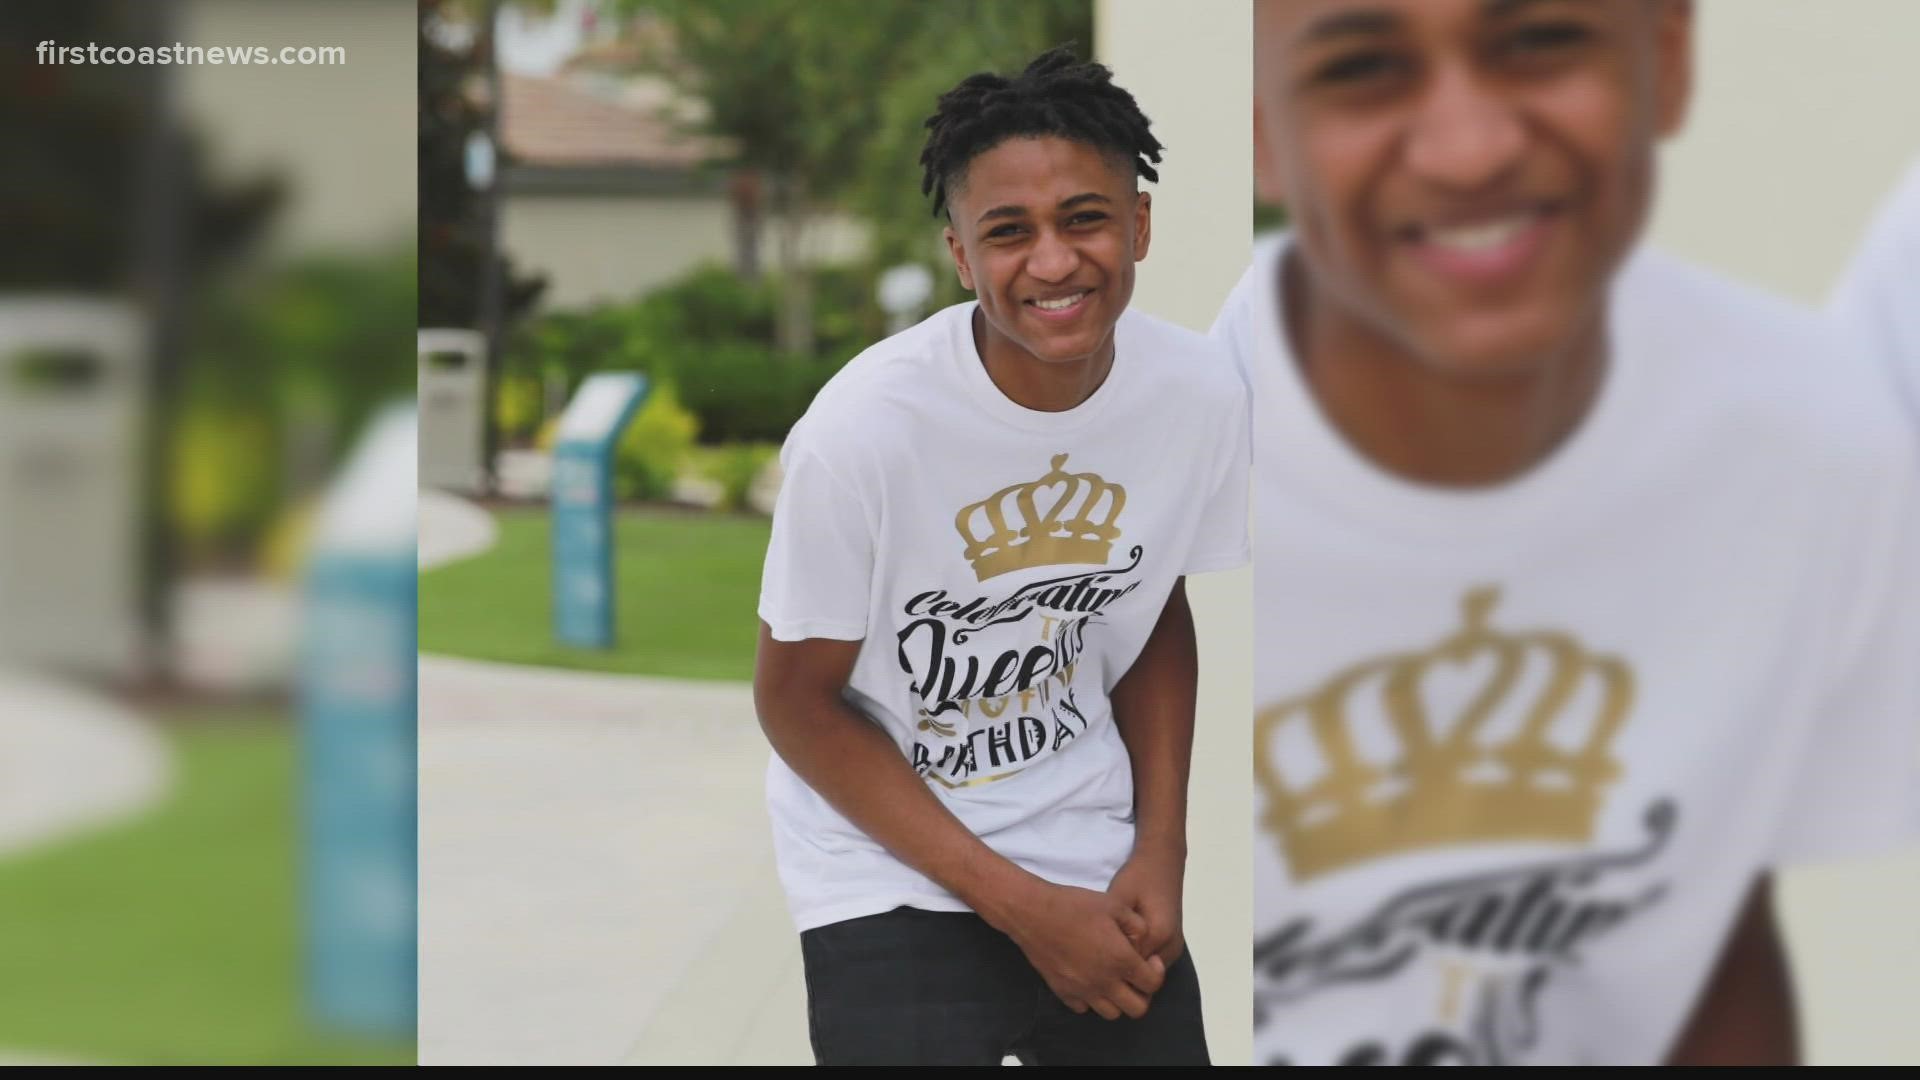 The 17-year-old who was killed during the mass shooting has been identified by family as Kaleb Floyd.